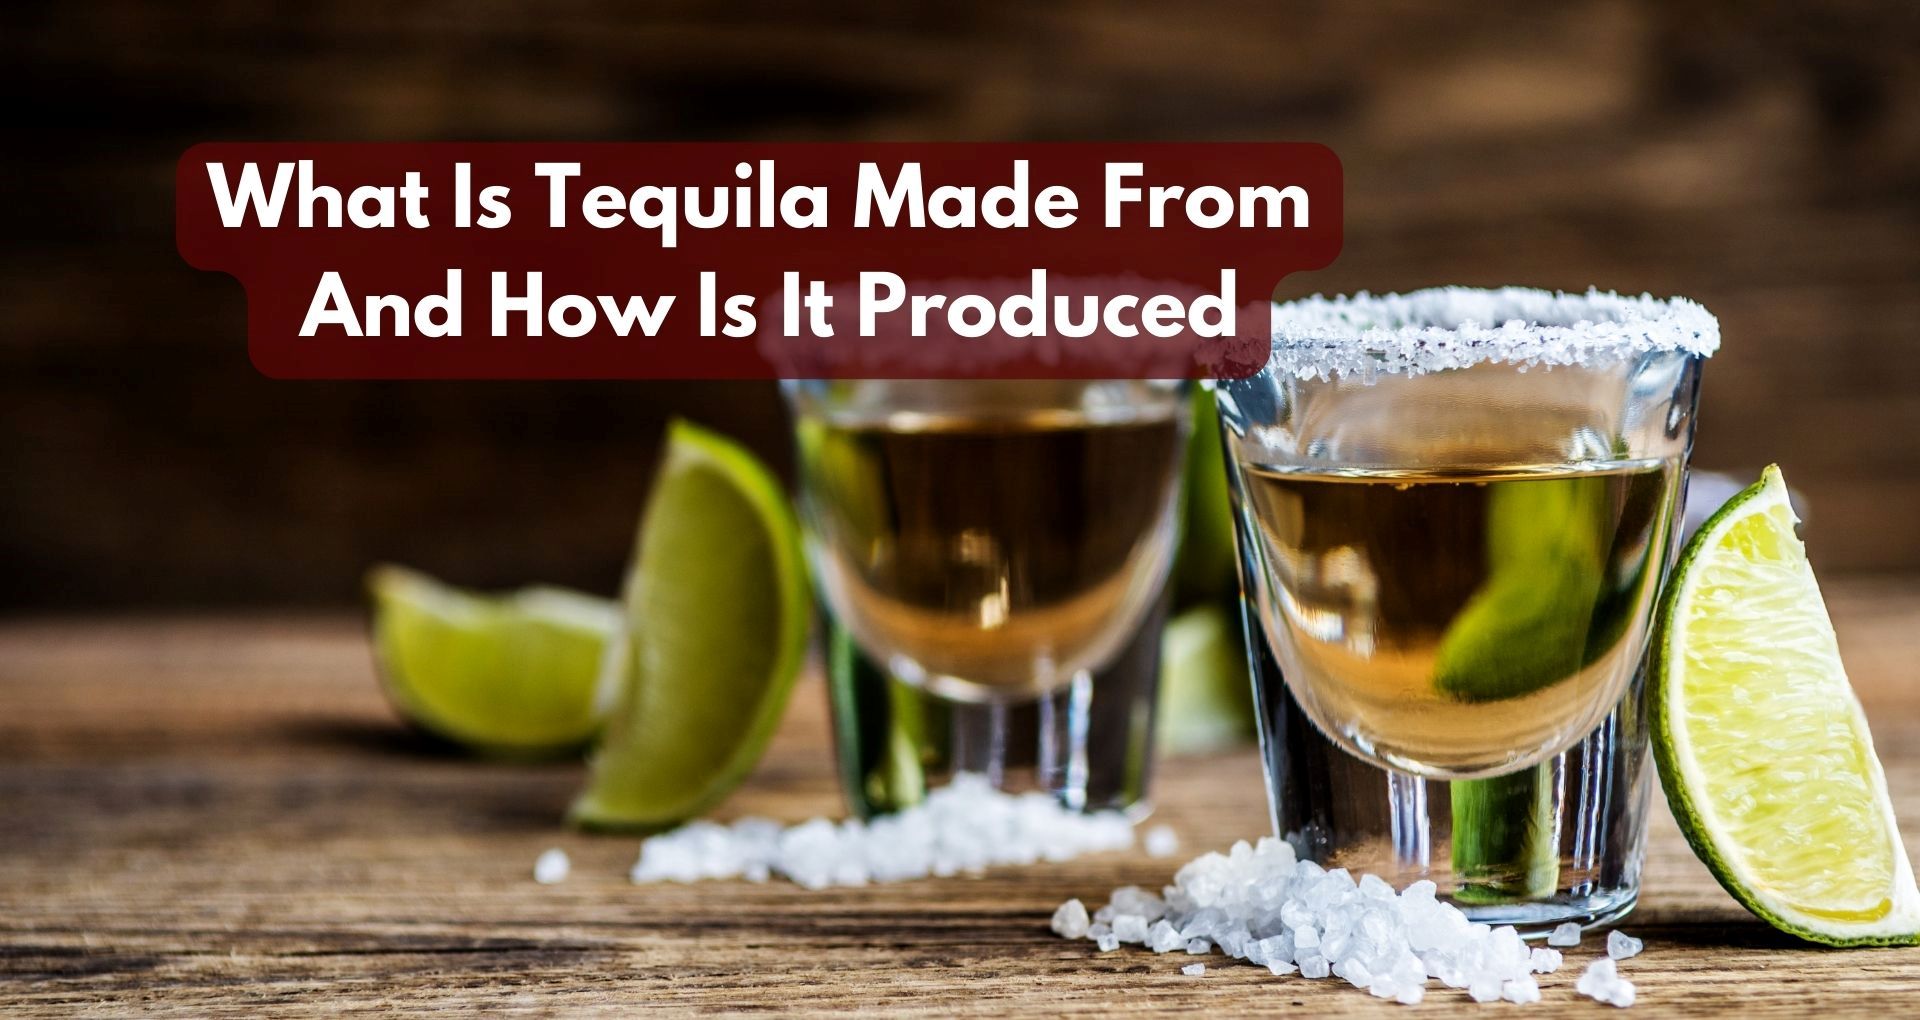 What Is Tequila Made From And How Is It Produced?